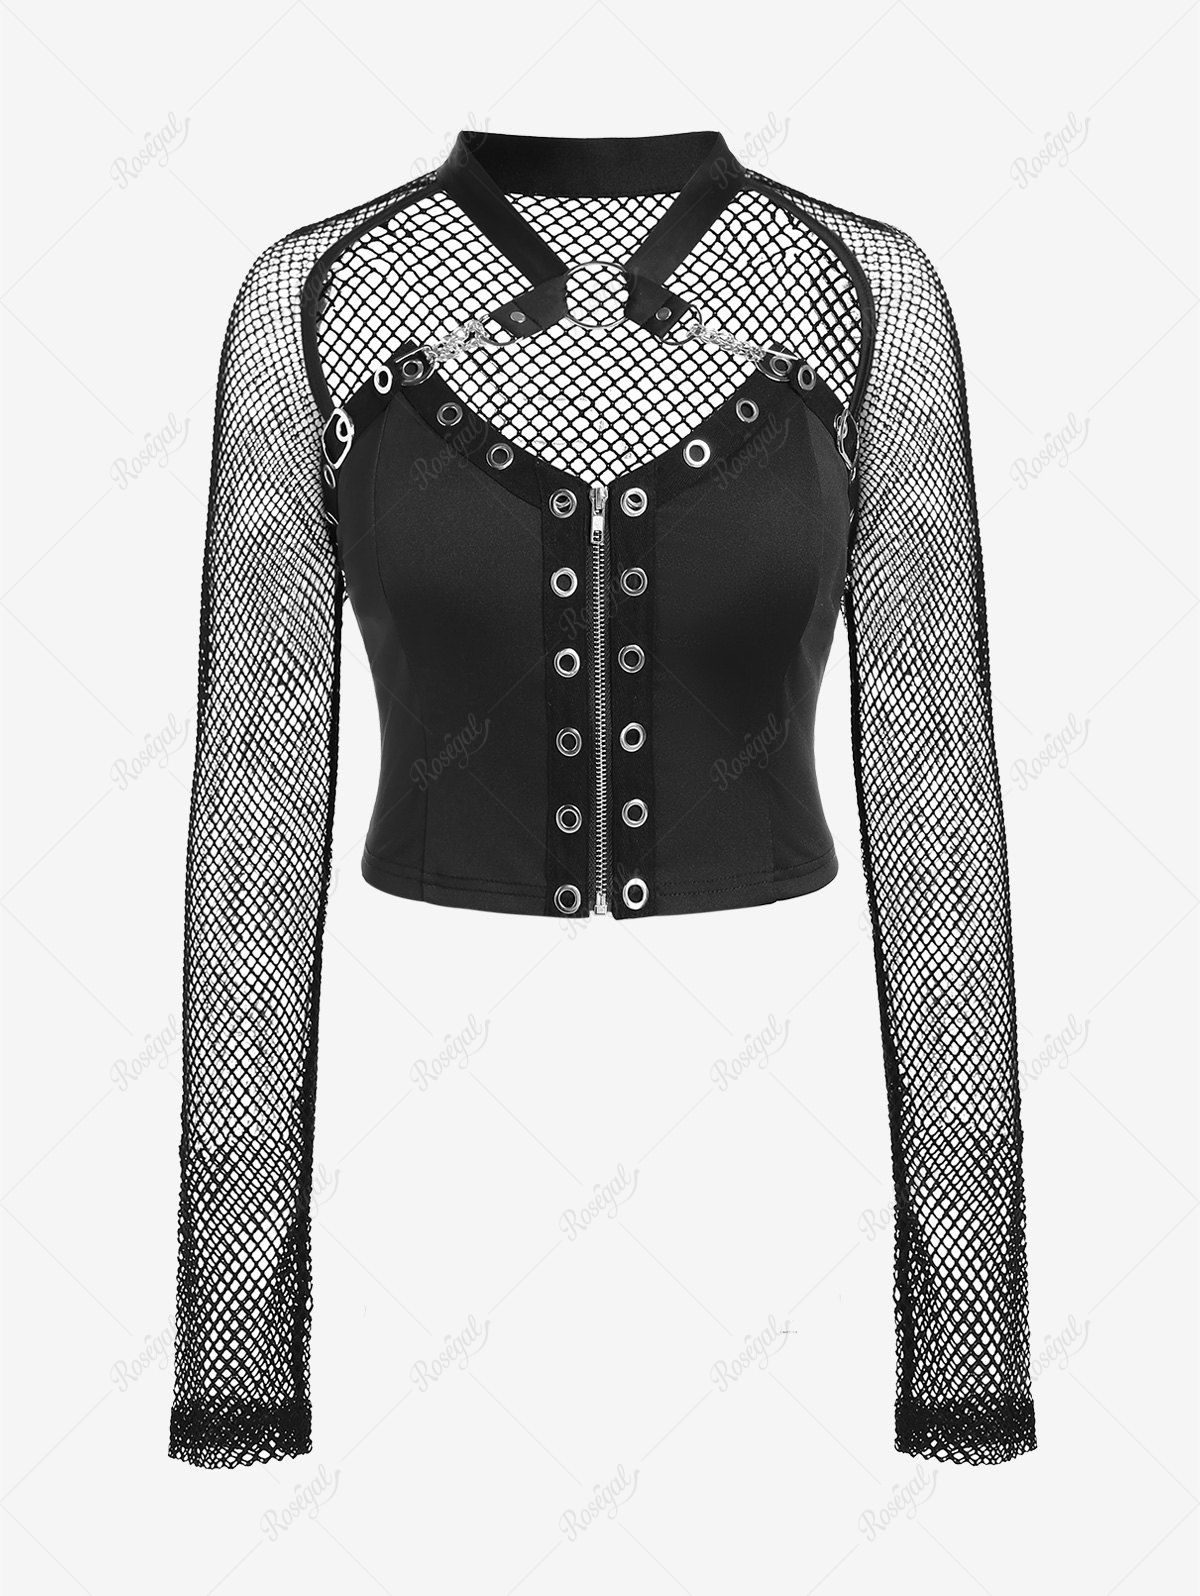 Chic Gothic Sheer Fishnet Cutout Grommets Ring Zip Front Crop Top  